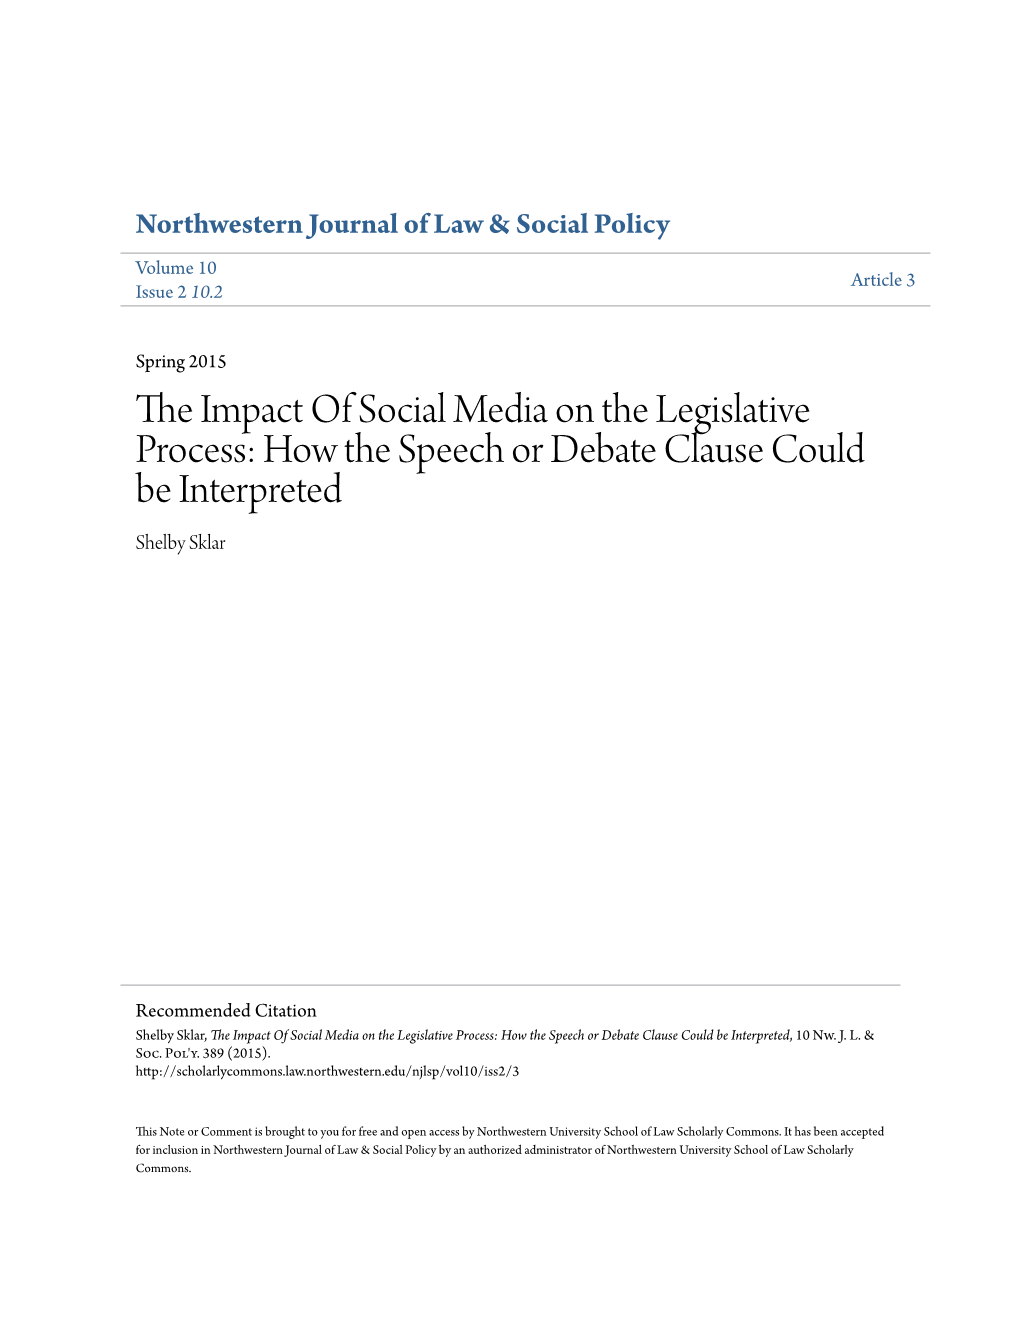 The Impact of Social Media on the Legislative Process: How the Speech Or Debate Clause Could Be Interpreted, 10 Nw